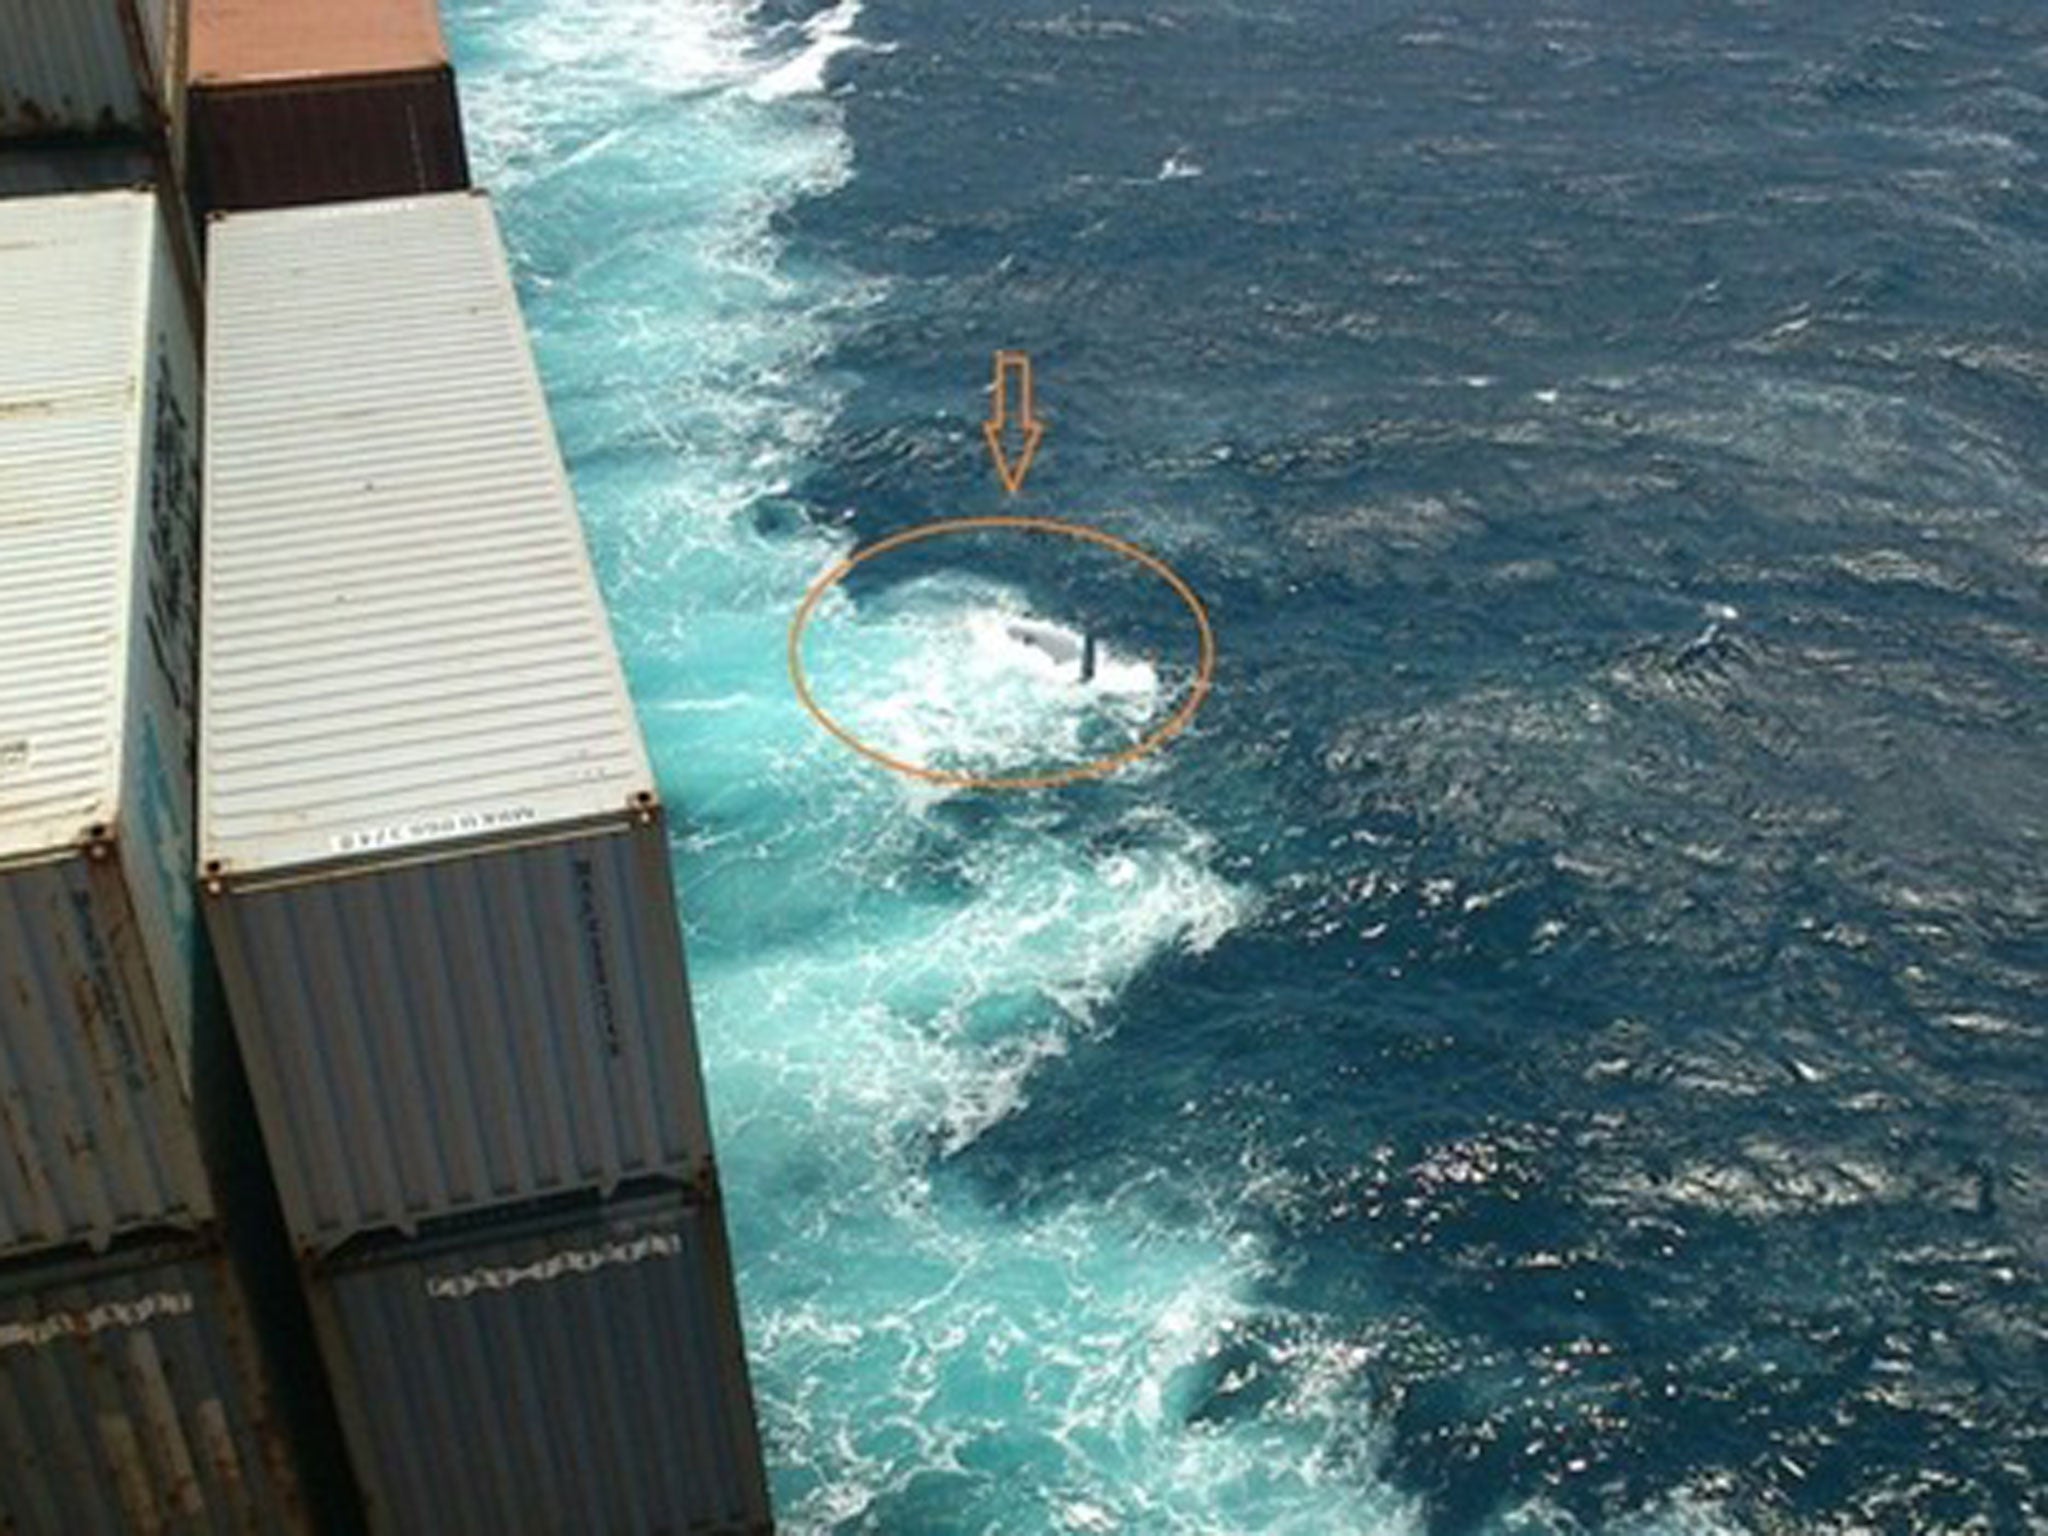 Photograph taken by the captain of a Maersk Kure cargo ship of what is believed to be upturned hull of the Cheeki Rafiki